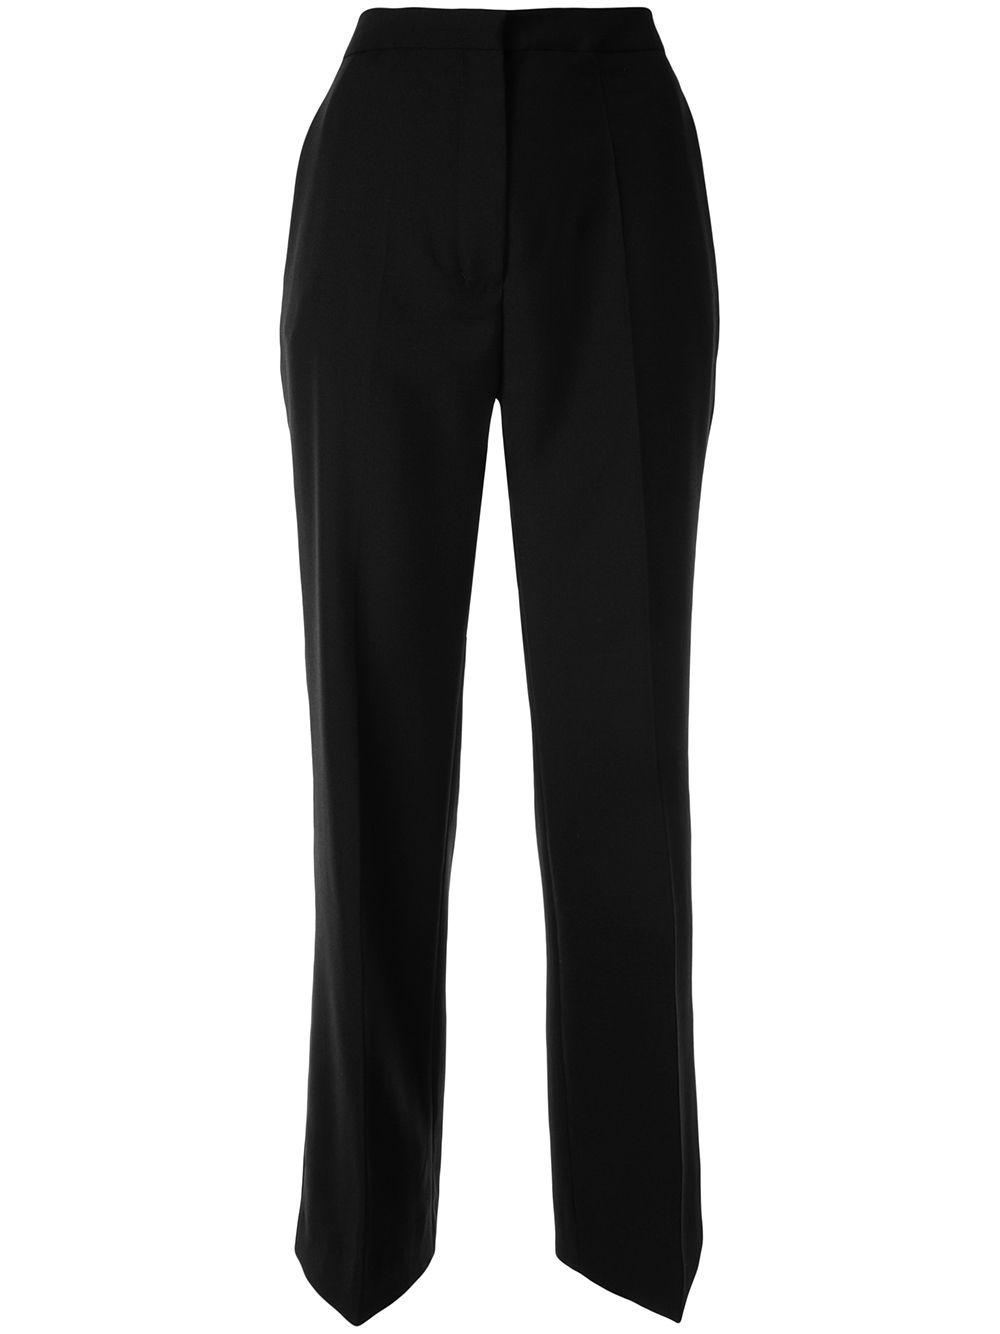 Ports 1961 Wool Tailored Flared Trousers in Black - Lyst